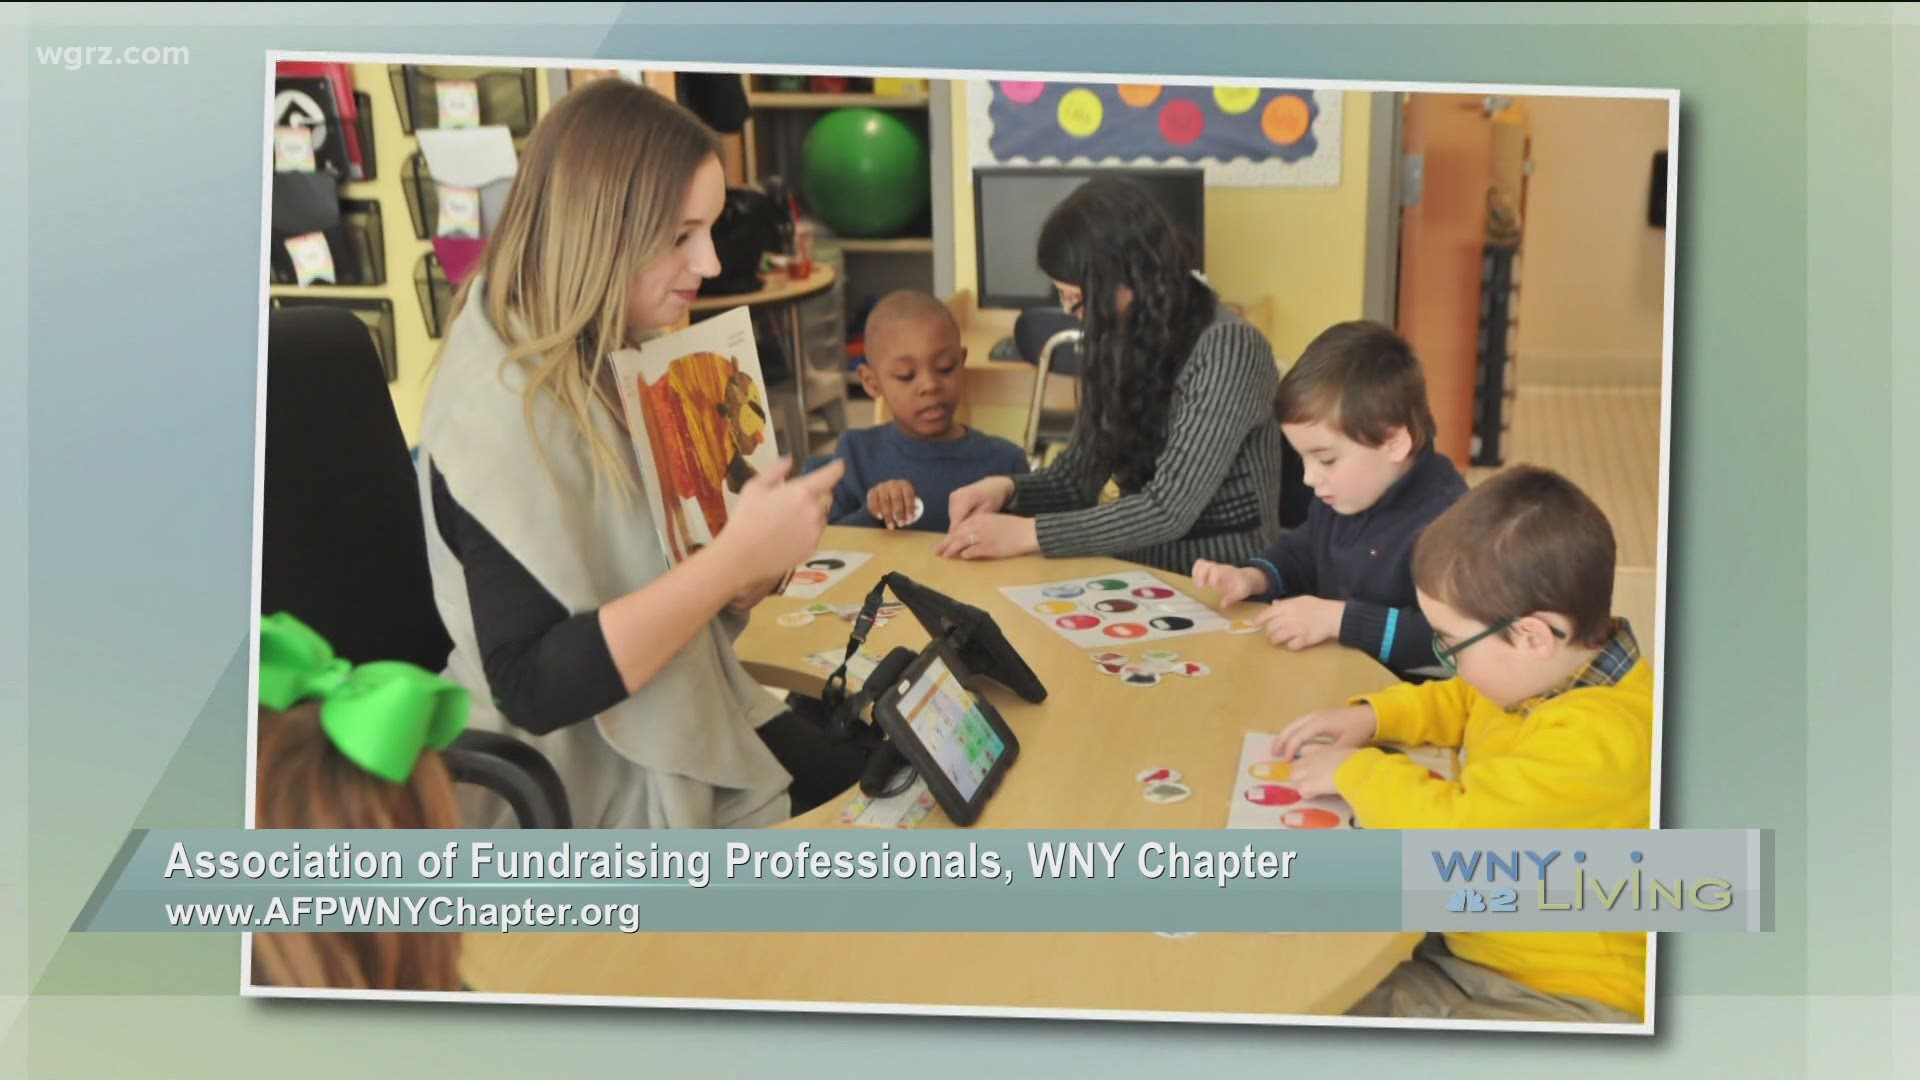 WNY Living - January 16 - Association of Fundraising Professionals, WNY Chapter (THIS VIDEO IS SPONSORED BY ASSOCIATION OF FUNDRAISING PROFESSIONALS, WNY CHAPTER)